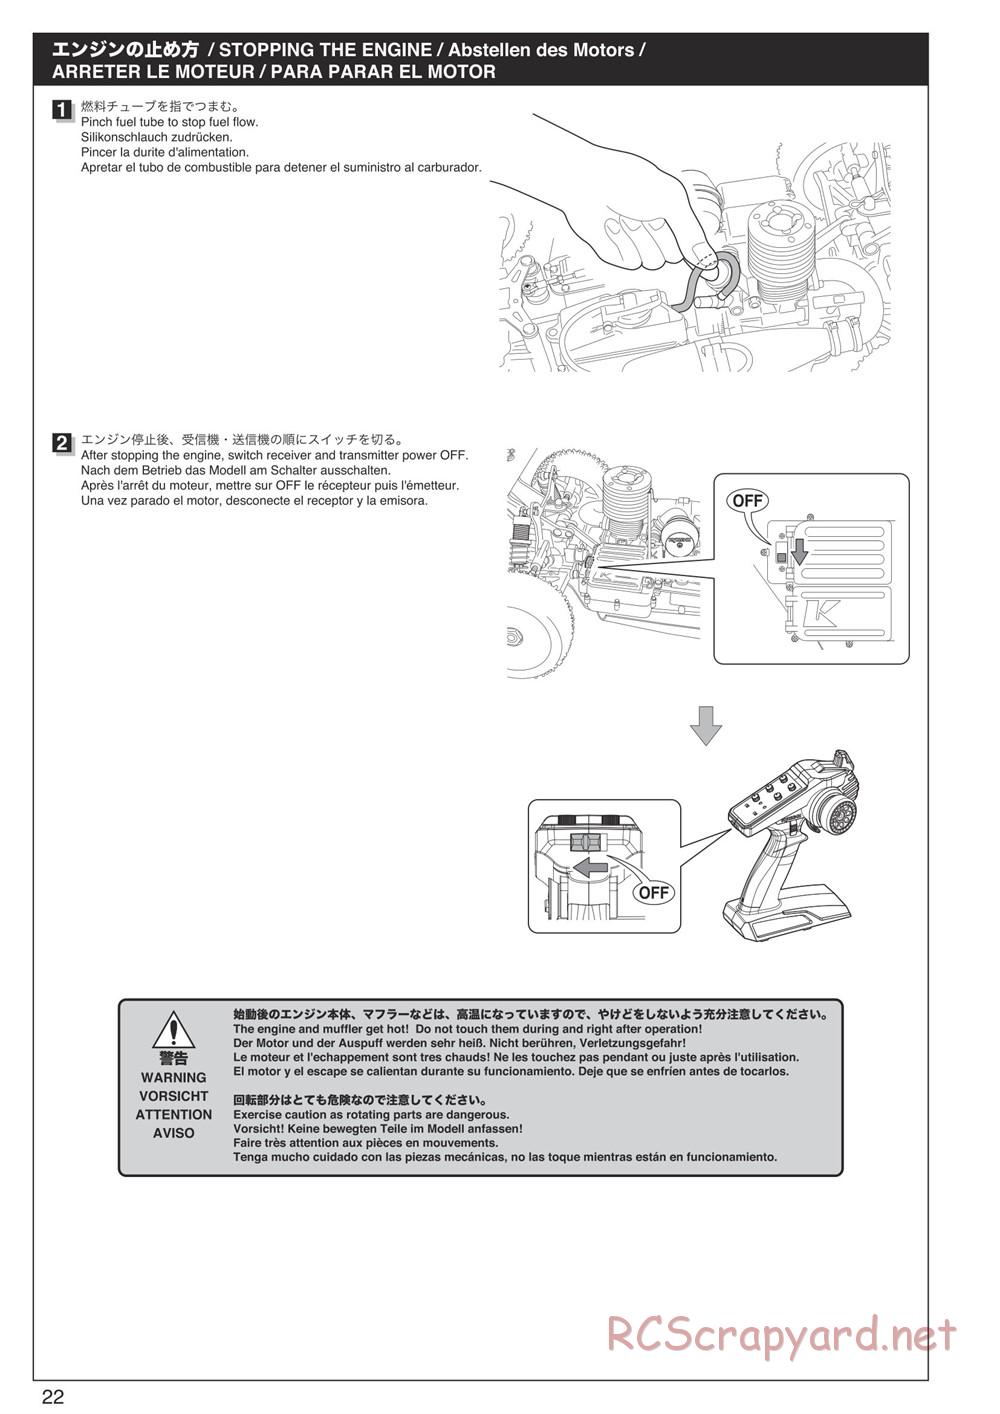 Kyosho - Inferno Neo 3.0 - Manual - Page 22